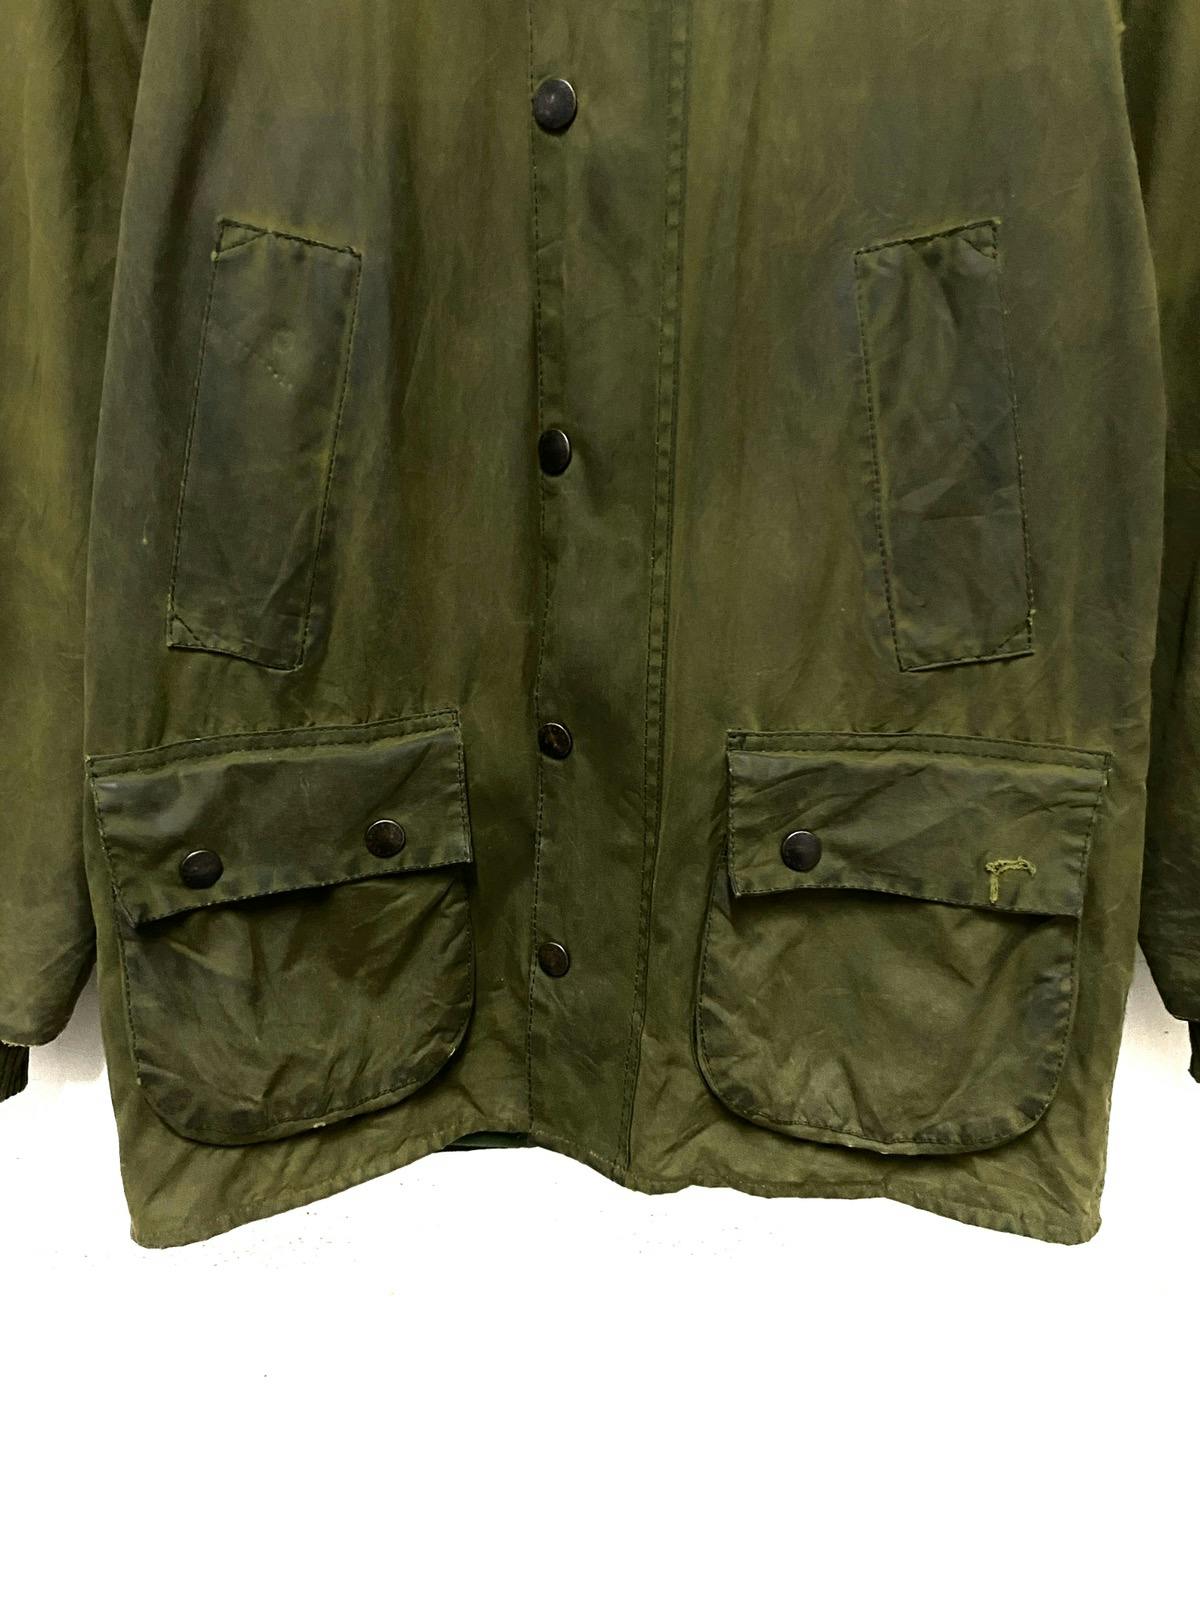 Barbour Bedale A100 Wax Jacket Made in England - 5